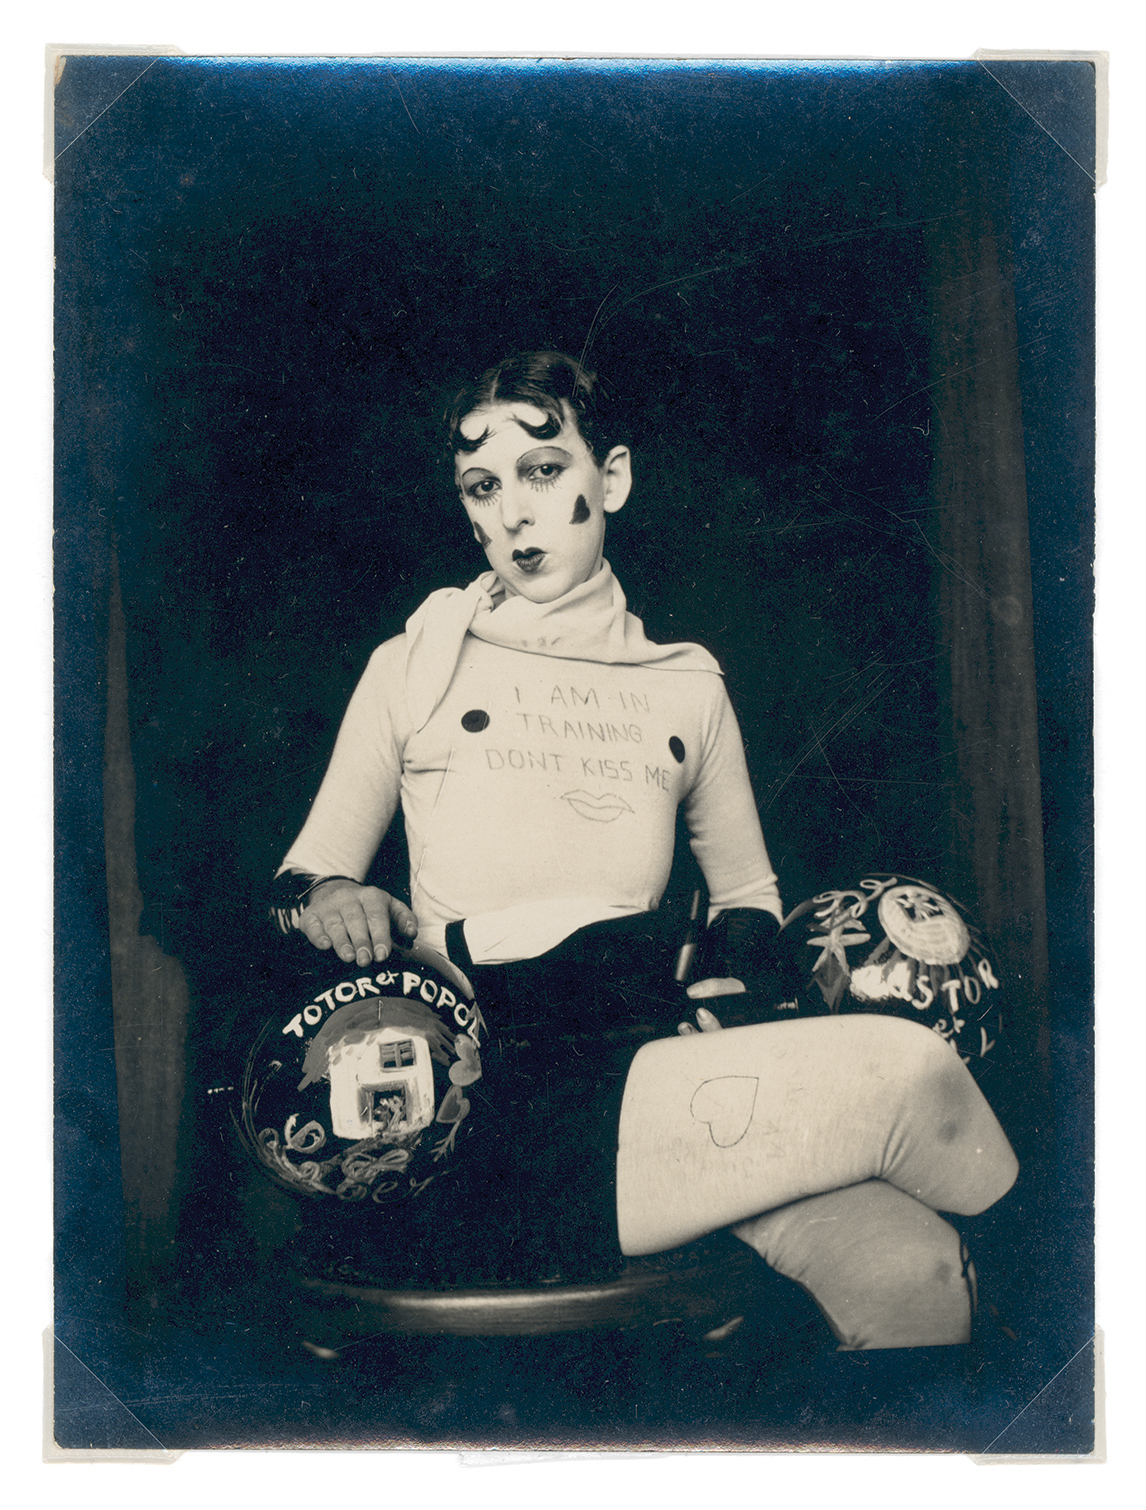 Claude Cahun (Lucy Schwob) and Marcel Moore (Suzanne Malherbe), 'Untitled' [I am in training don't kiss me], 1927.